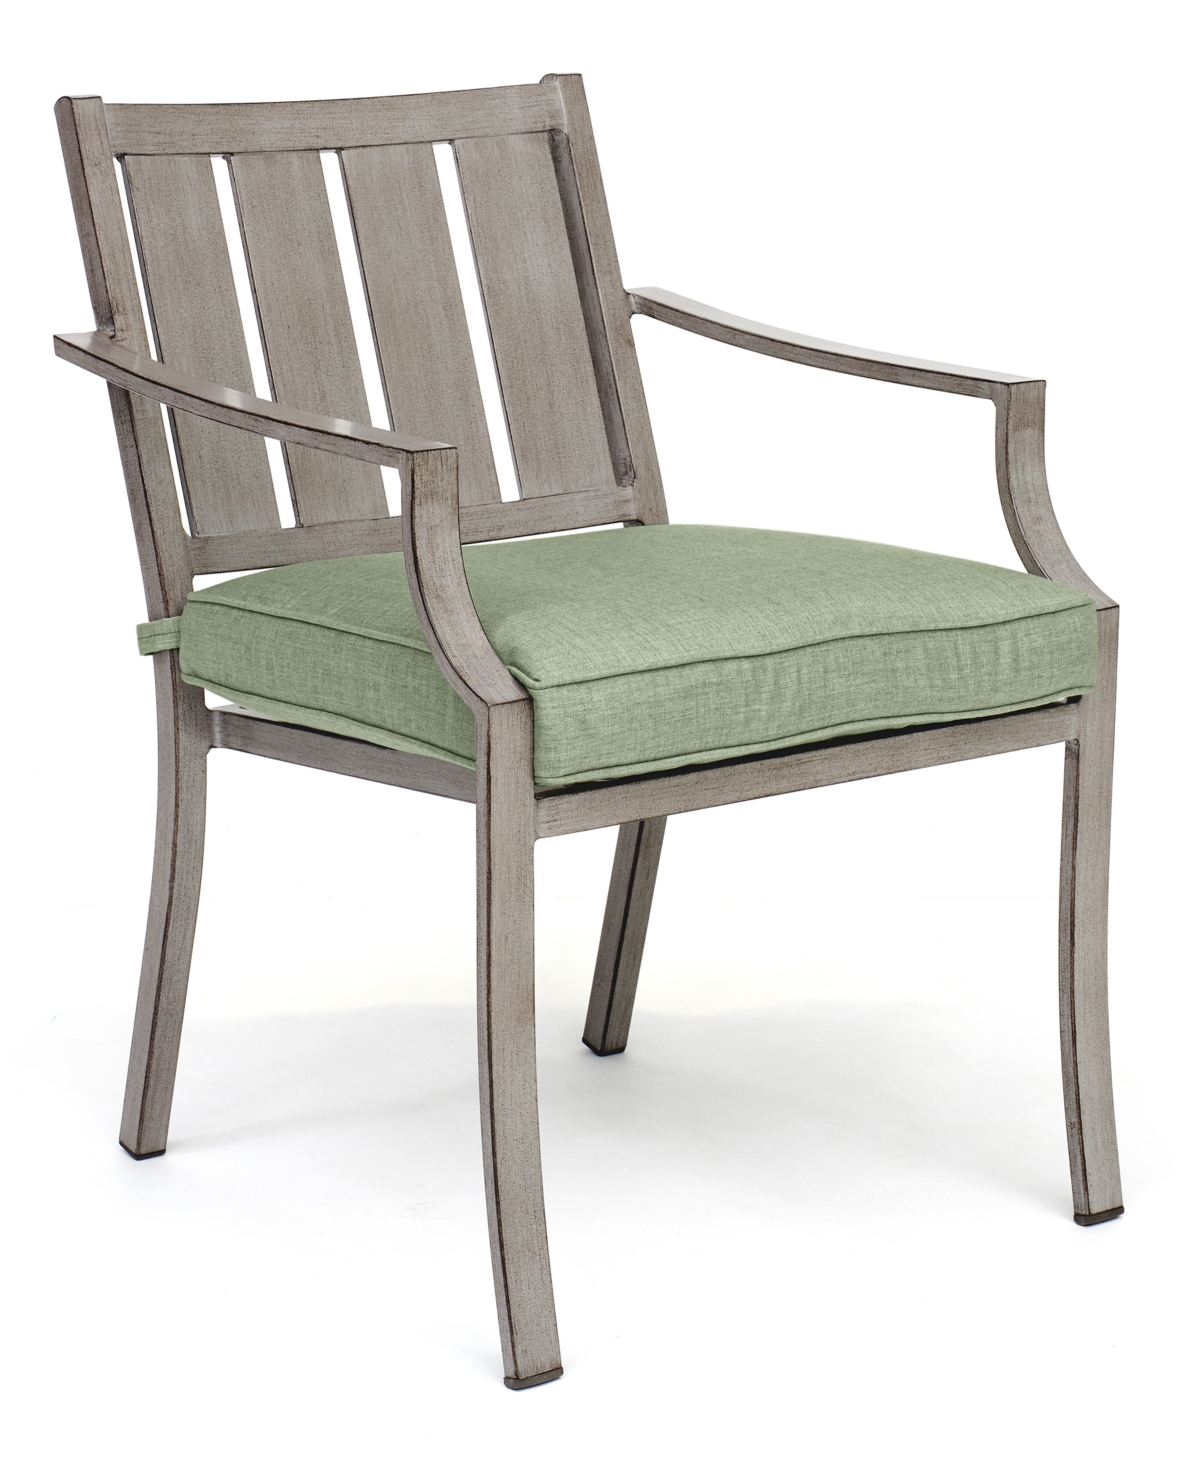 Furniture Outdoor Replacement Dining Chair Cushion In Outdura Grasshopper